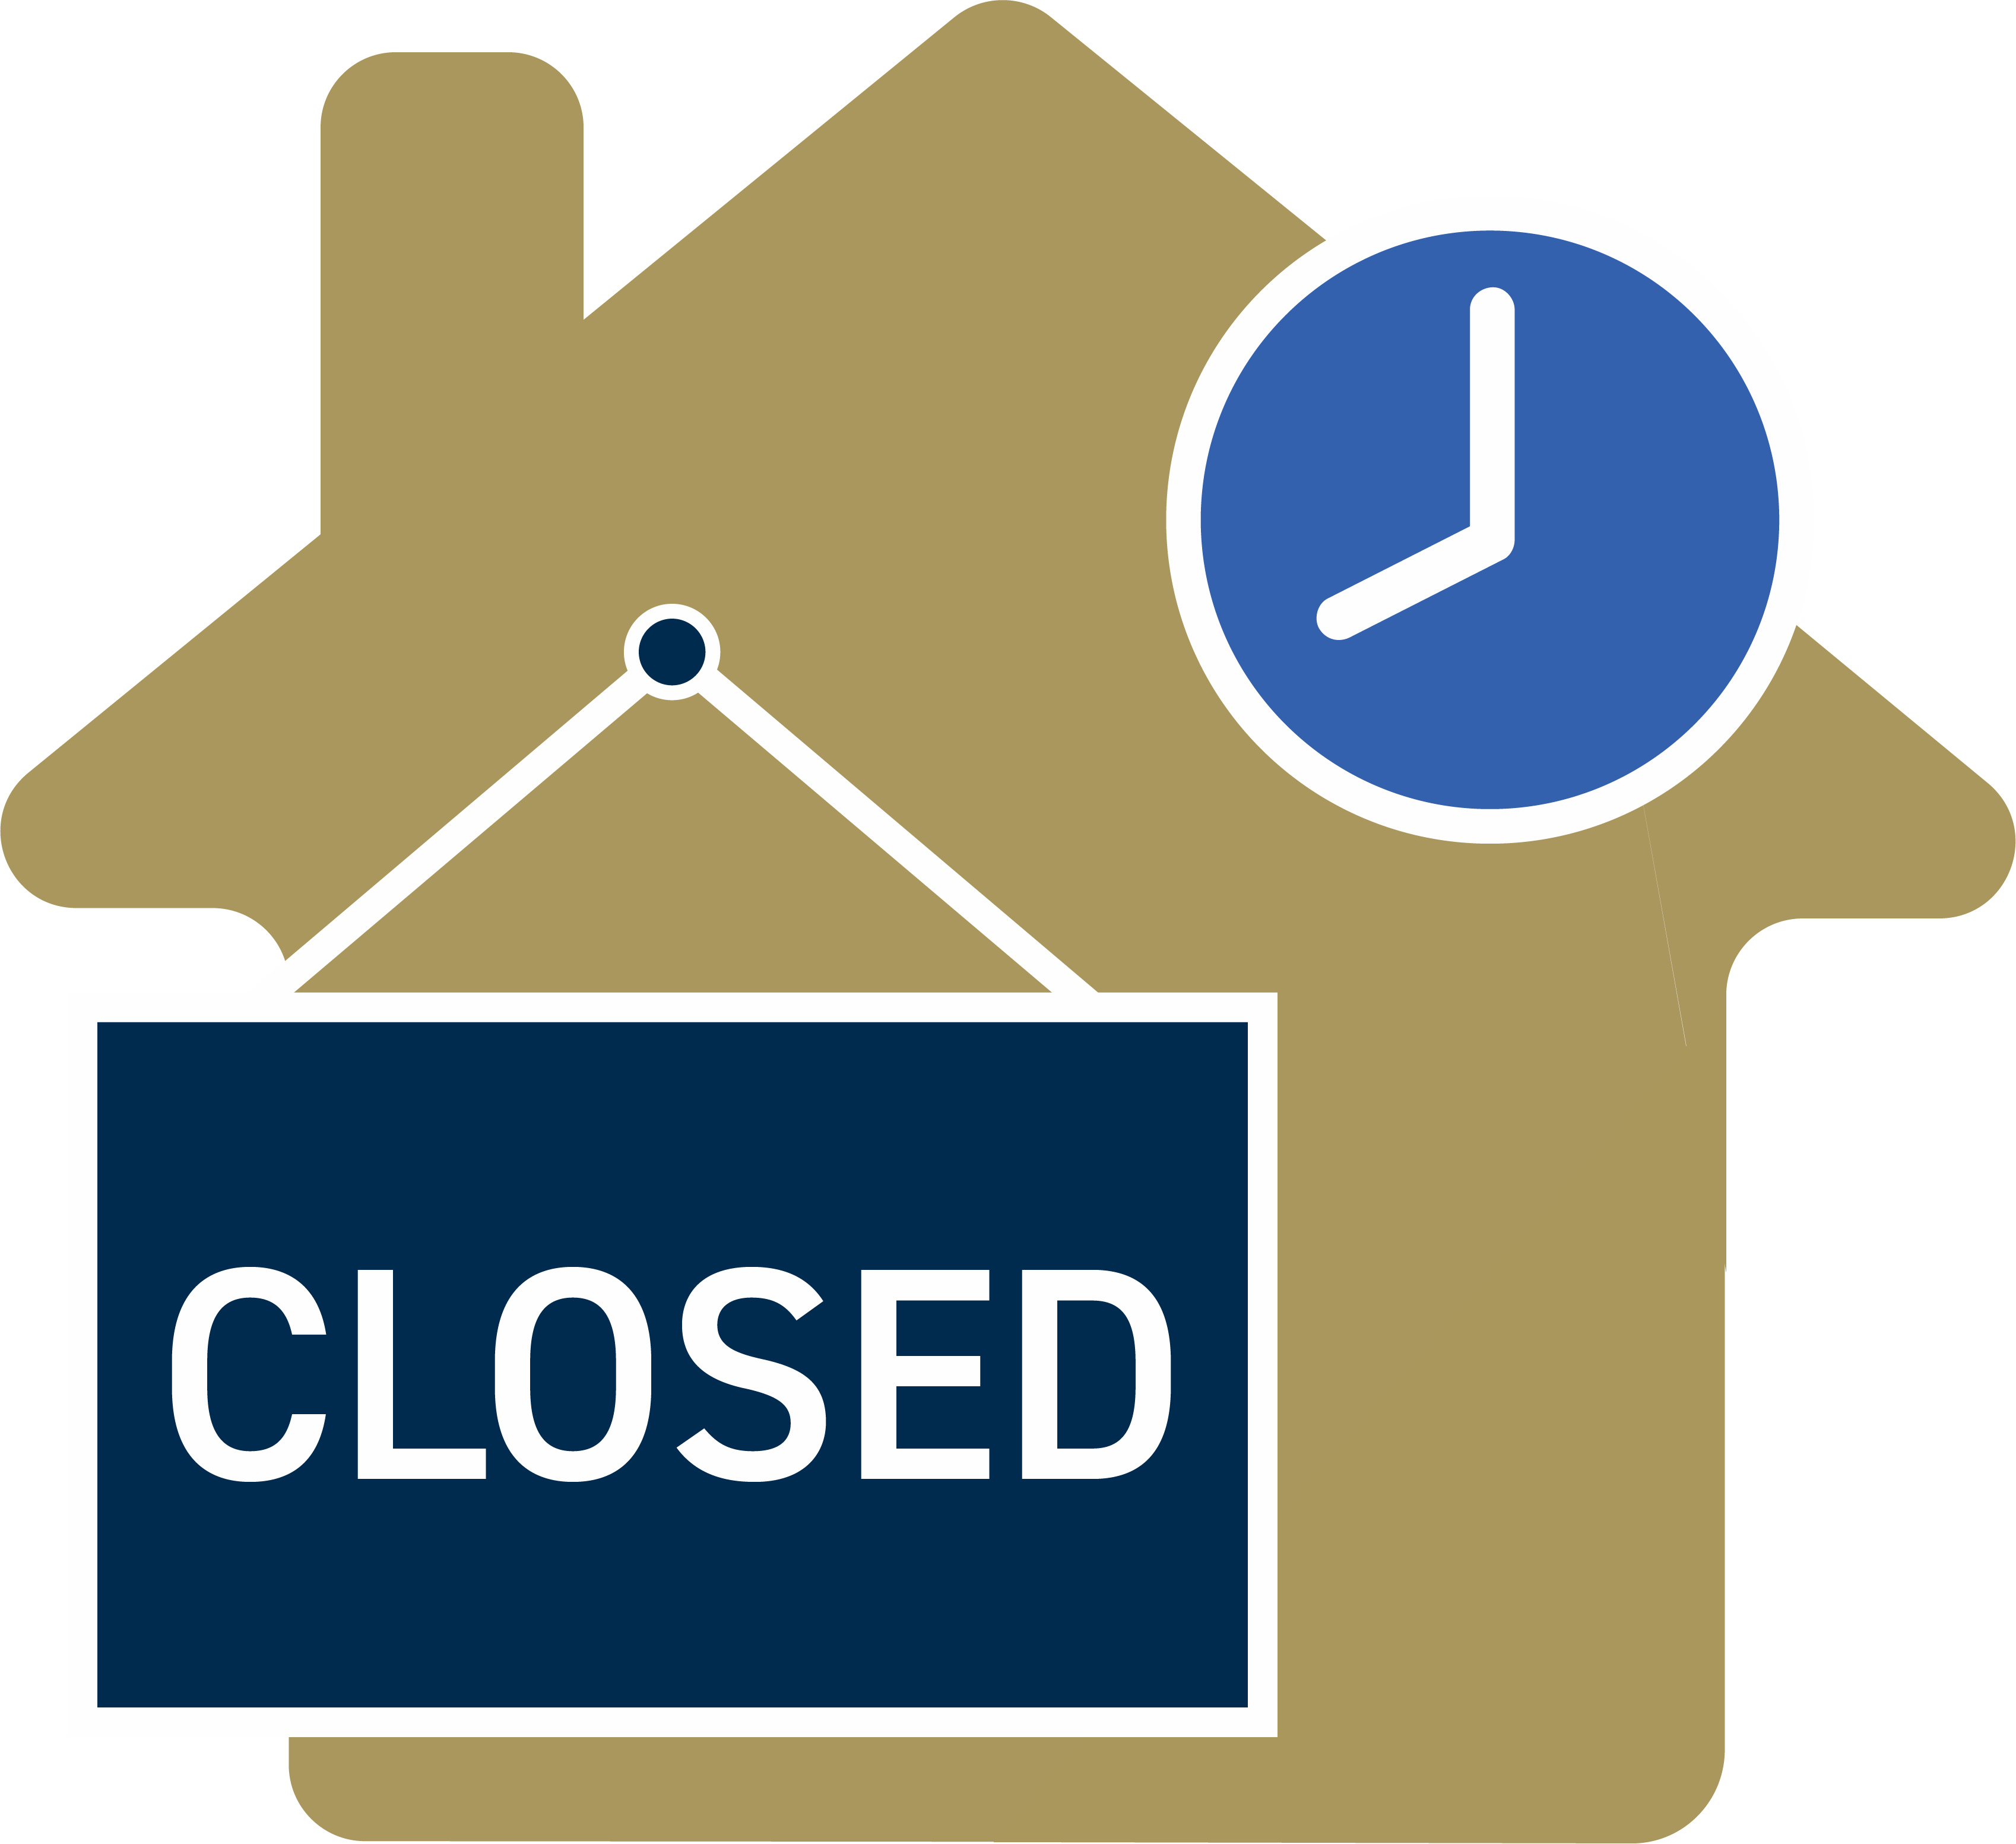 Icon of a house with a clock and a sign that reads "Closed"